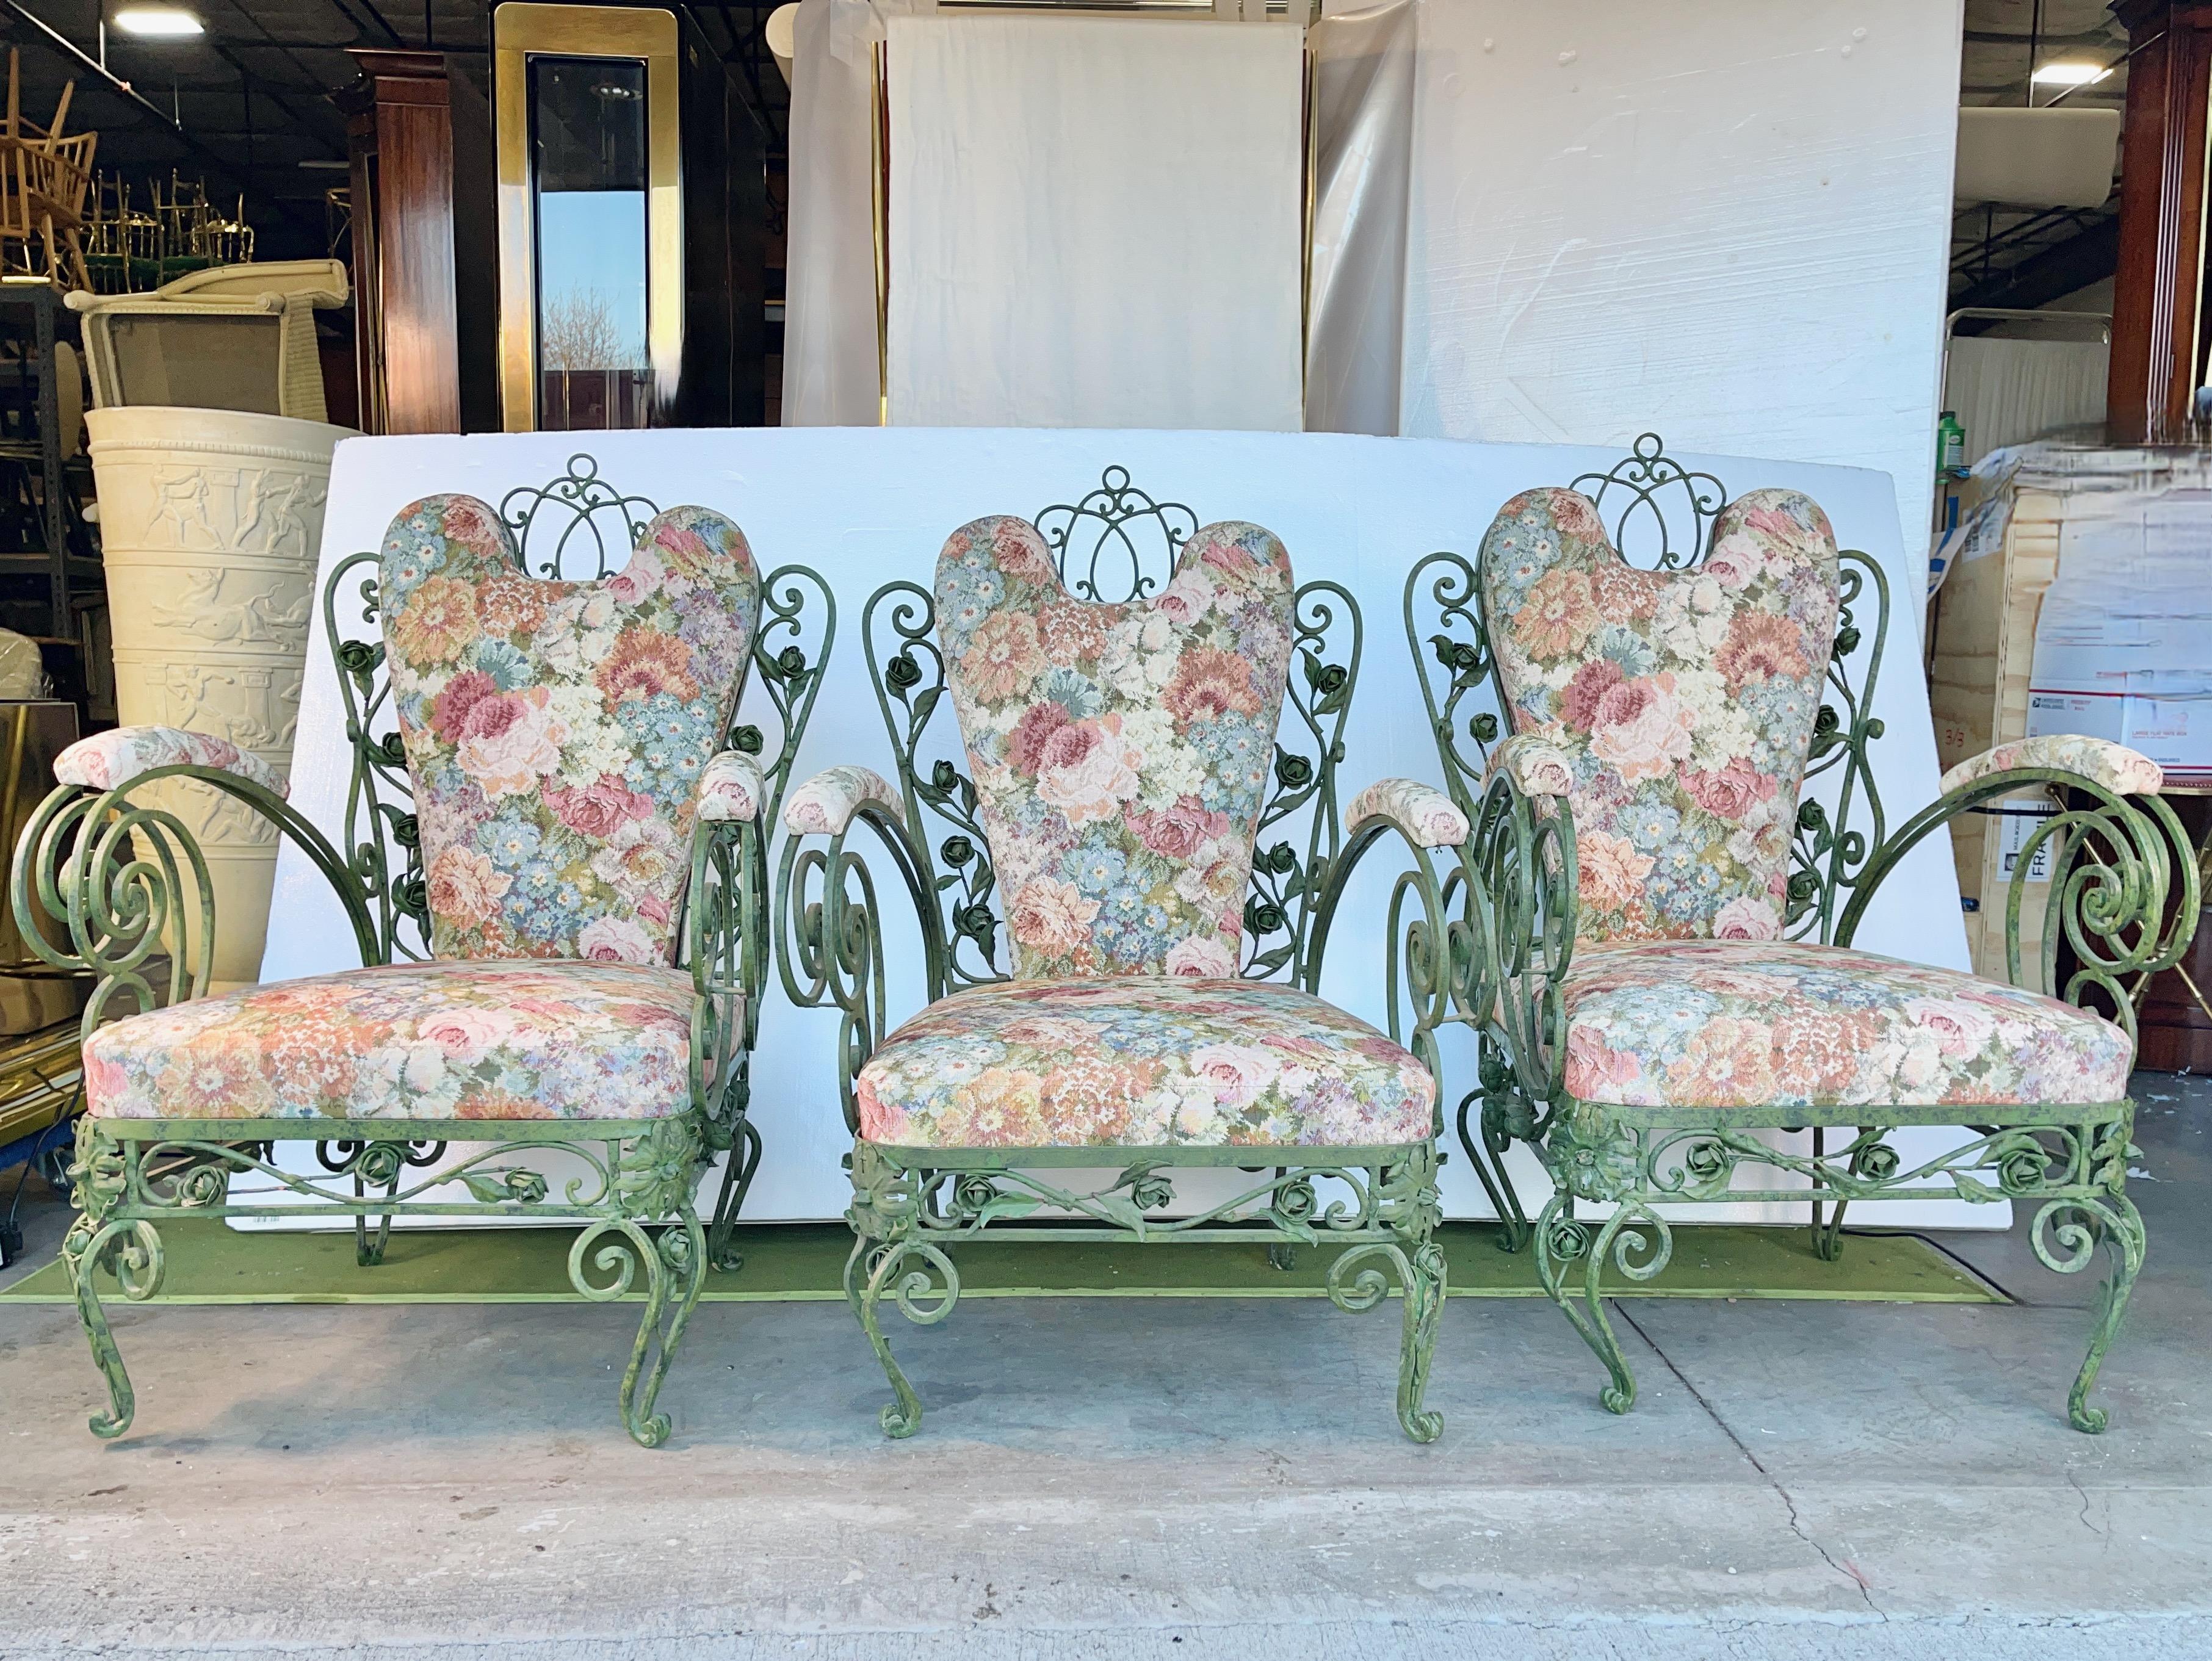 Three Italian wrought iron oversized patio chairs with upholstered seats, backs and armrest pads. 
Note the distinctive iron rosebuds, stems and leaves among the iron scrolls.
Original mottled green baked enamel finish.
The original weather